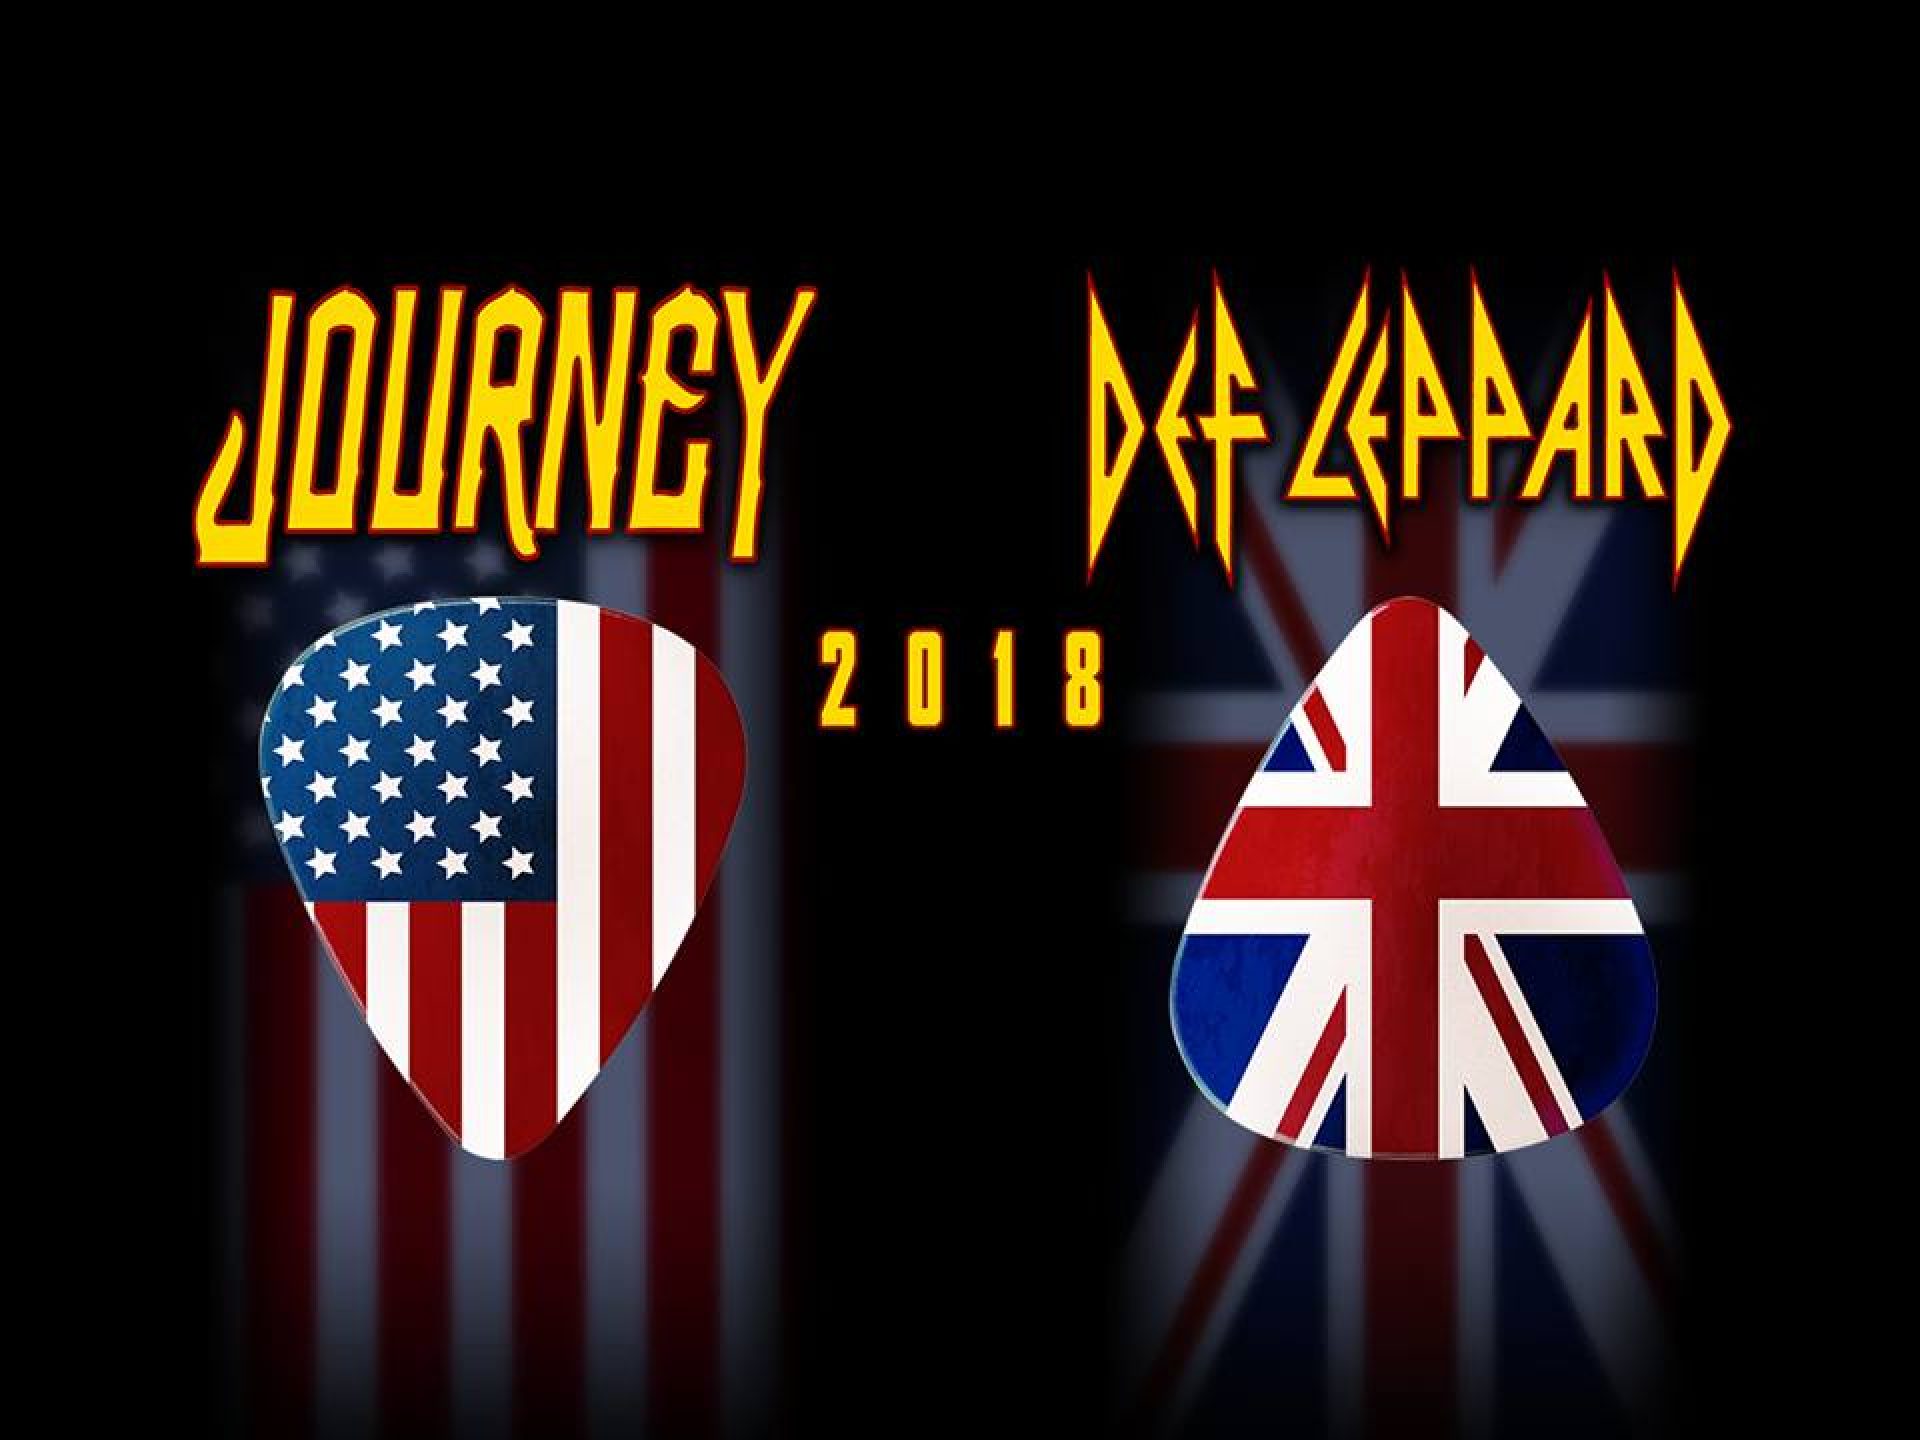 Def Leppard and Journey announce 58city tour, including stop at Fenway